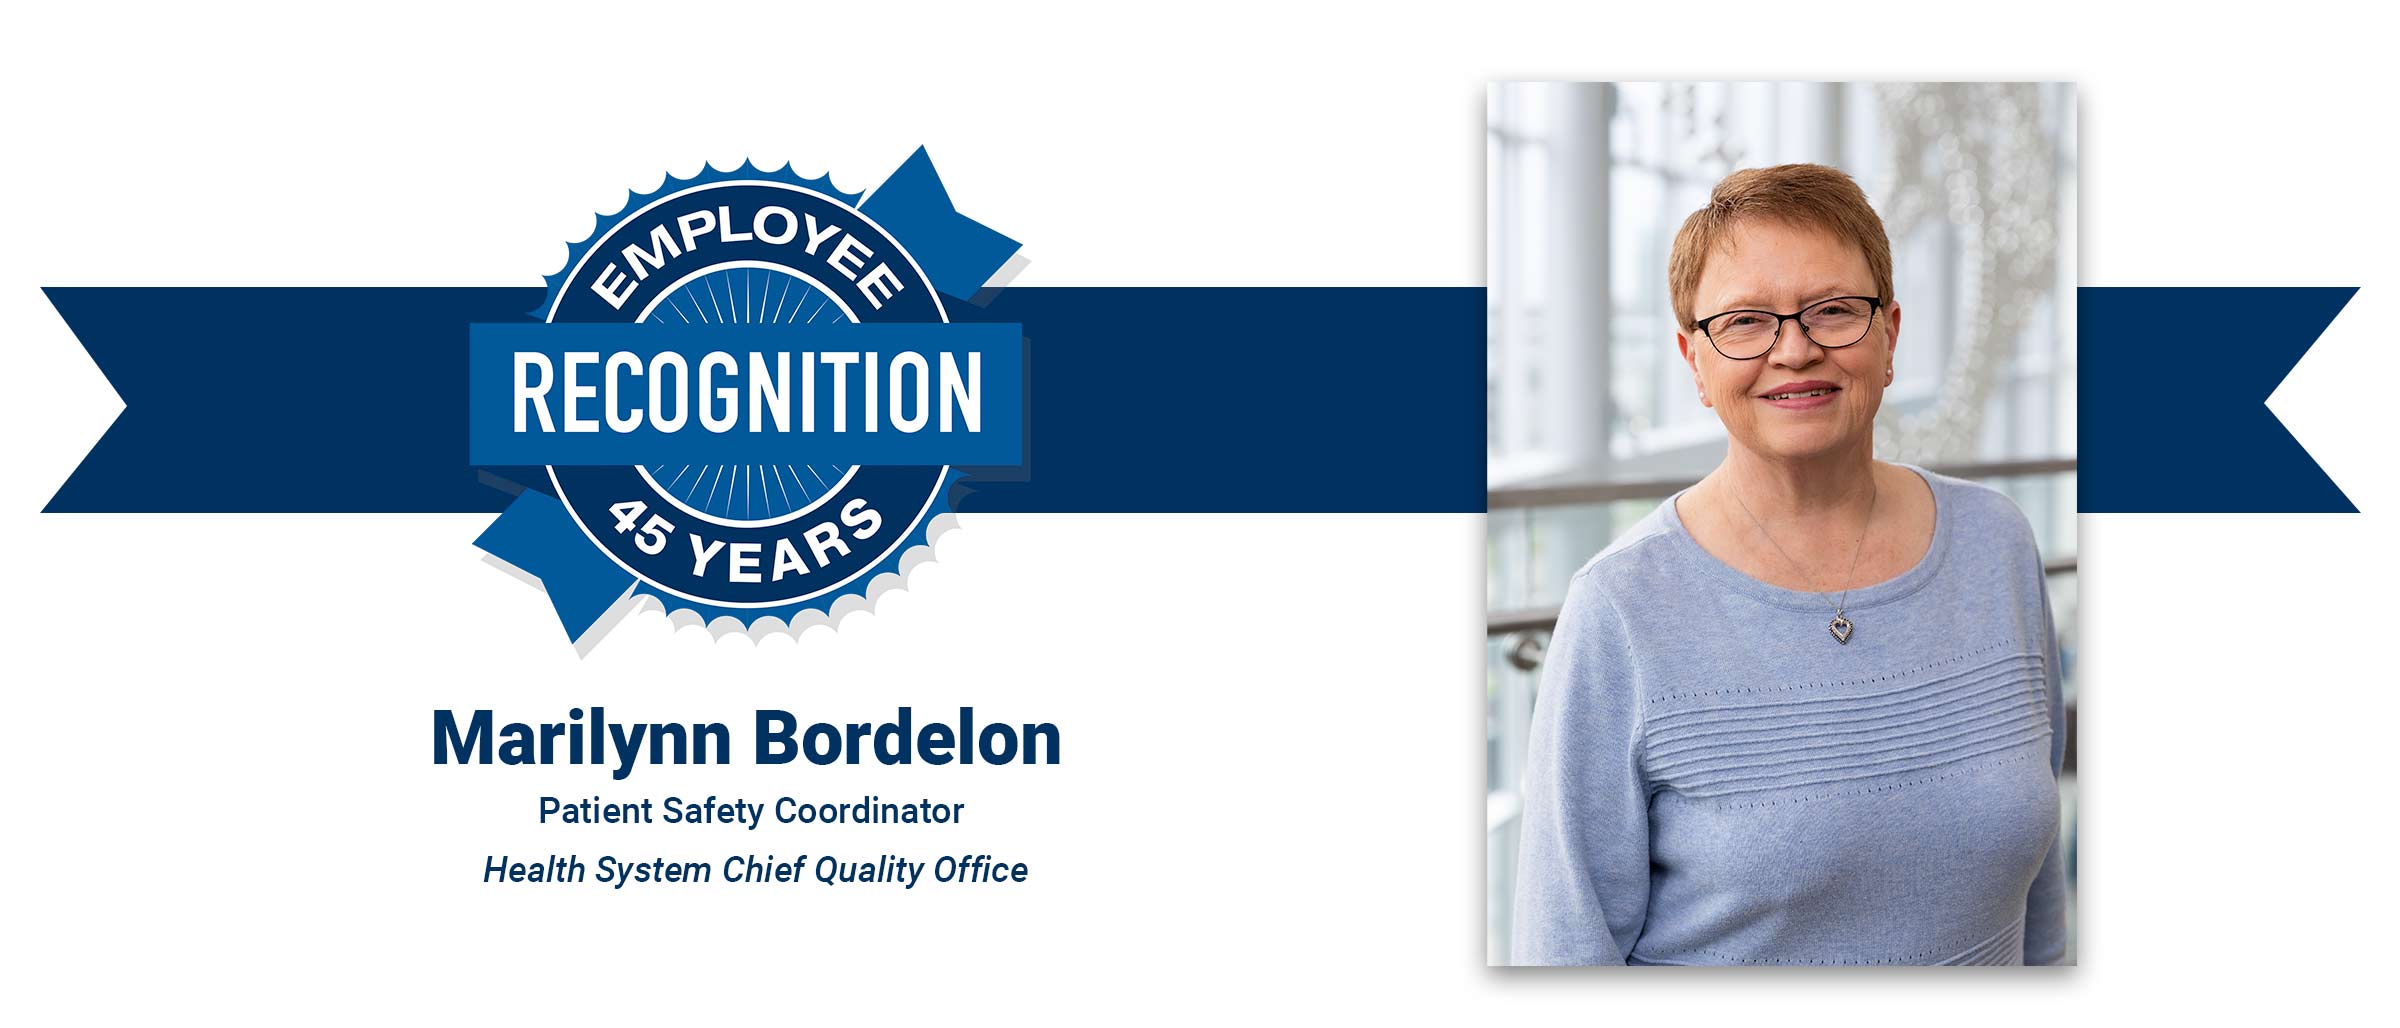 Woman with short red hair, light blue shirt. Marilynn Bordelon, 45 years employee recognition.